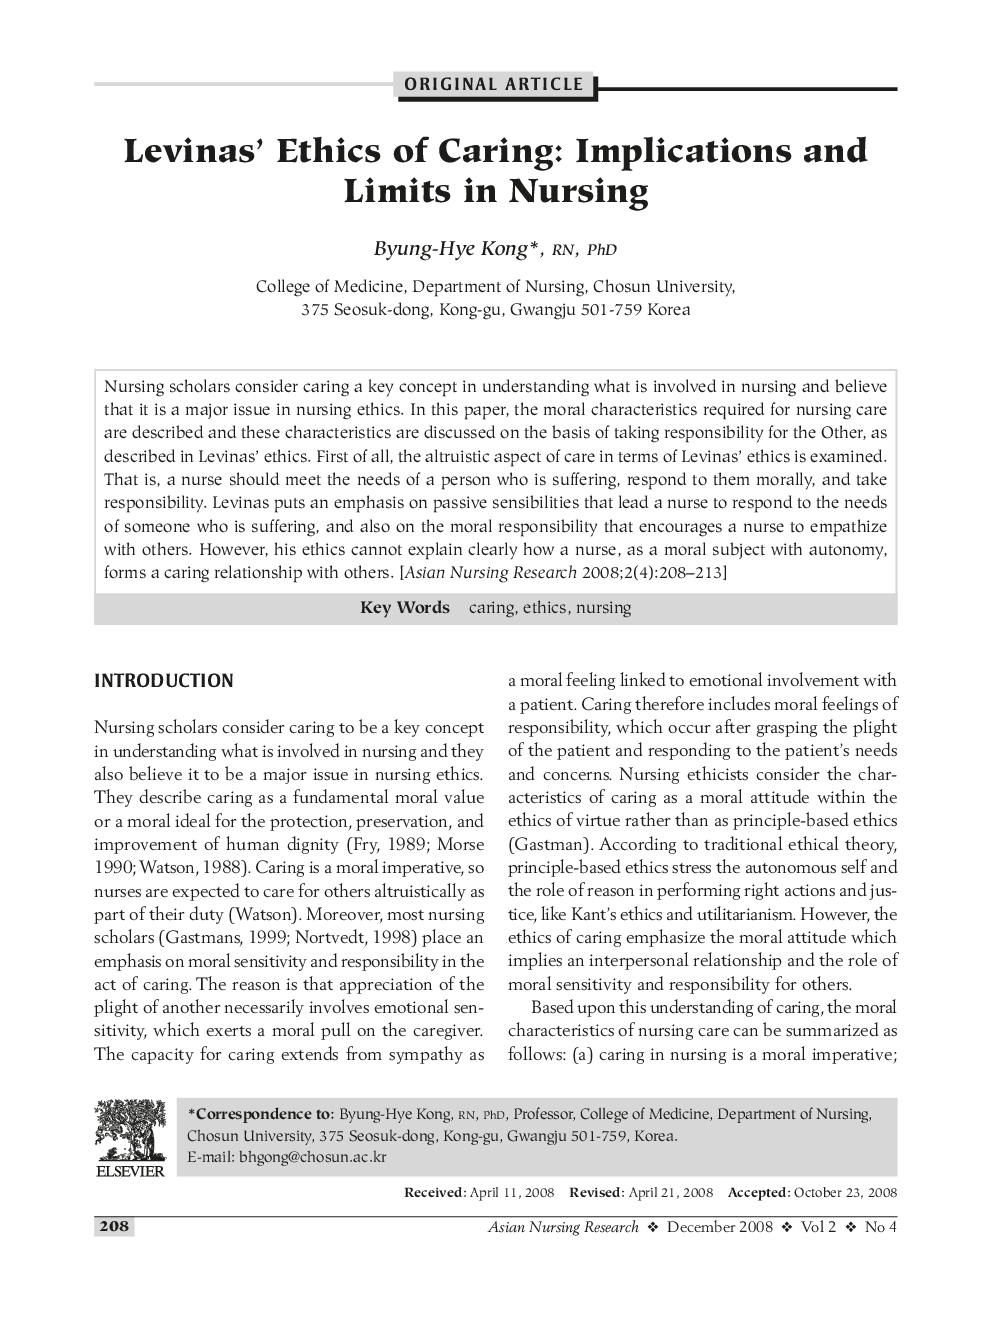 Levinas' Ethics of Caring: Implications and Limits in Nursing